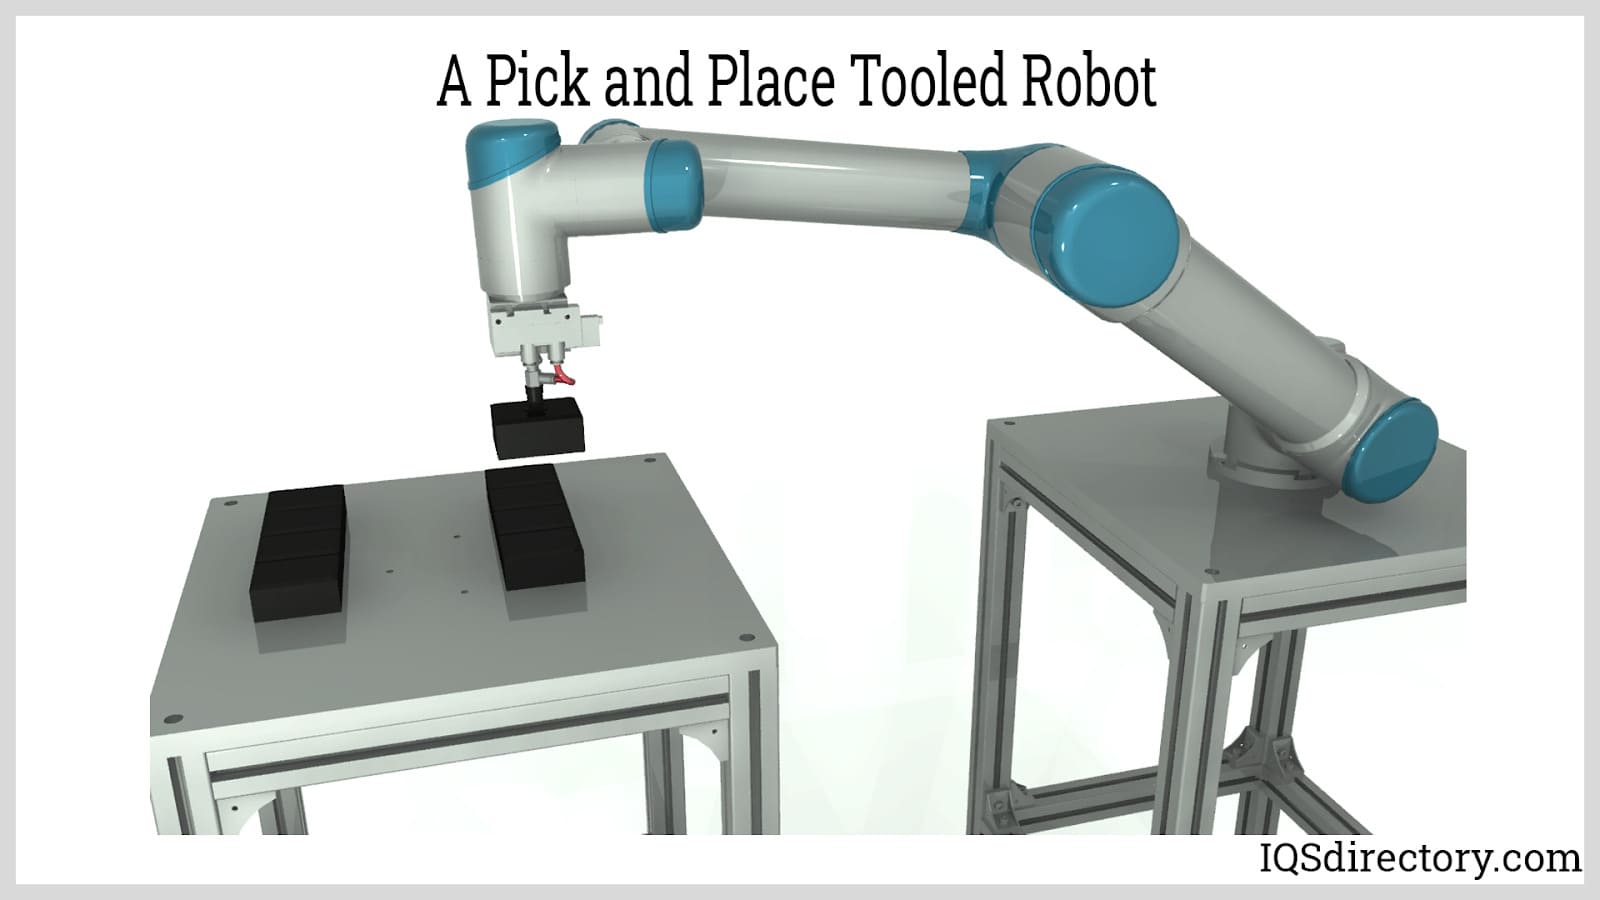 A Pick and Place Tooled Robot